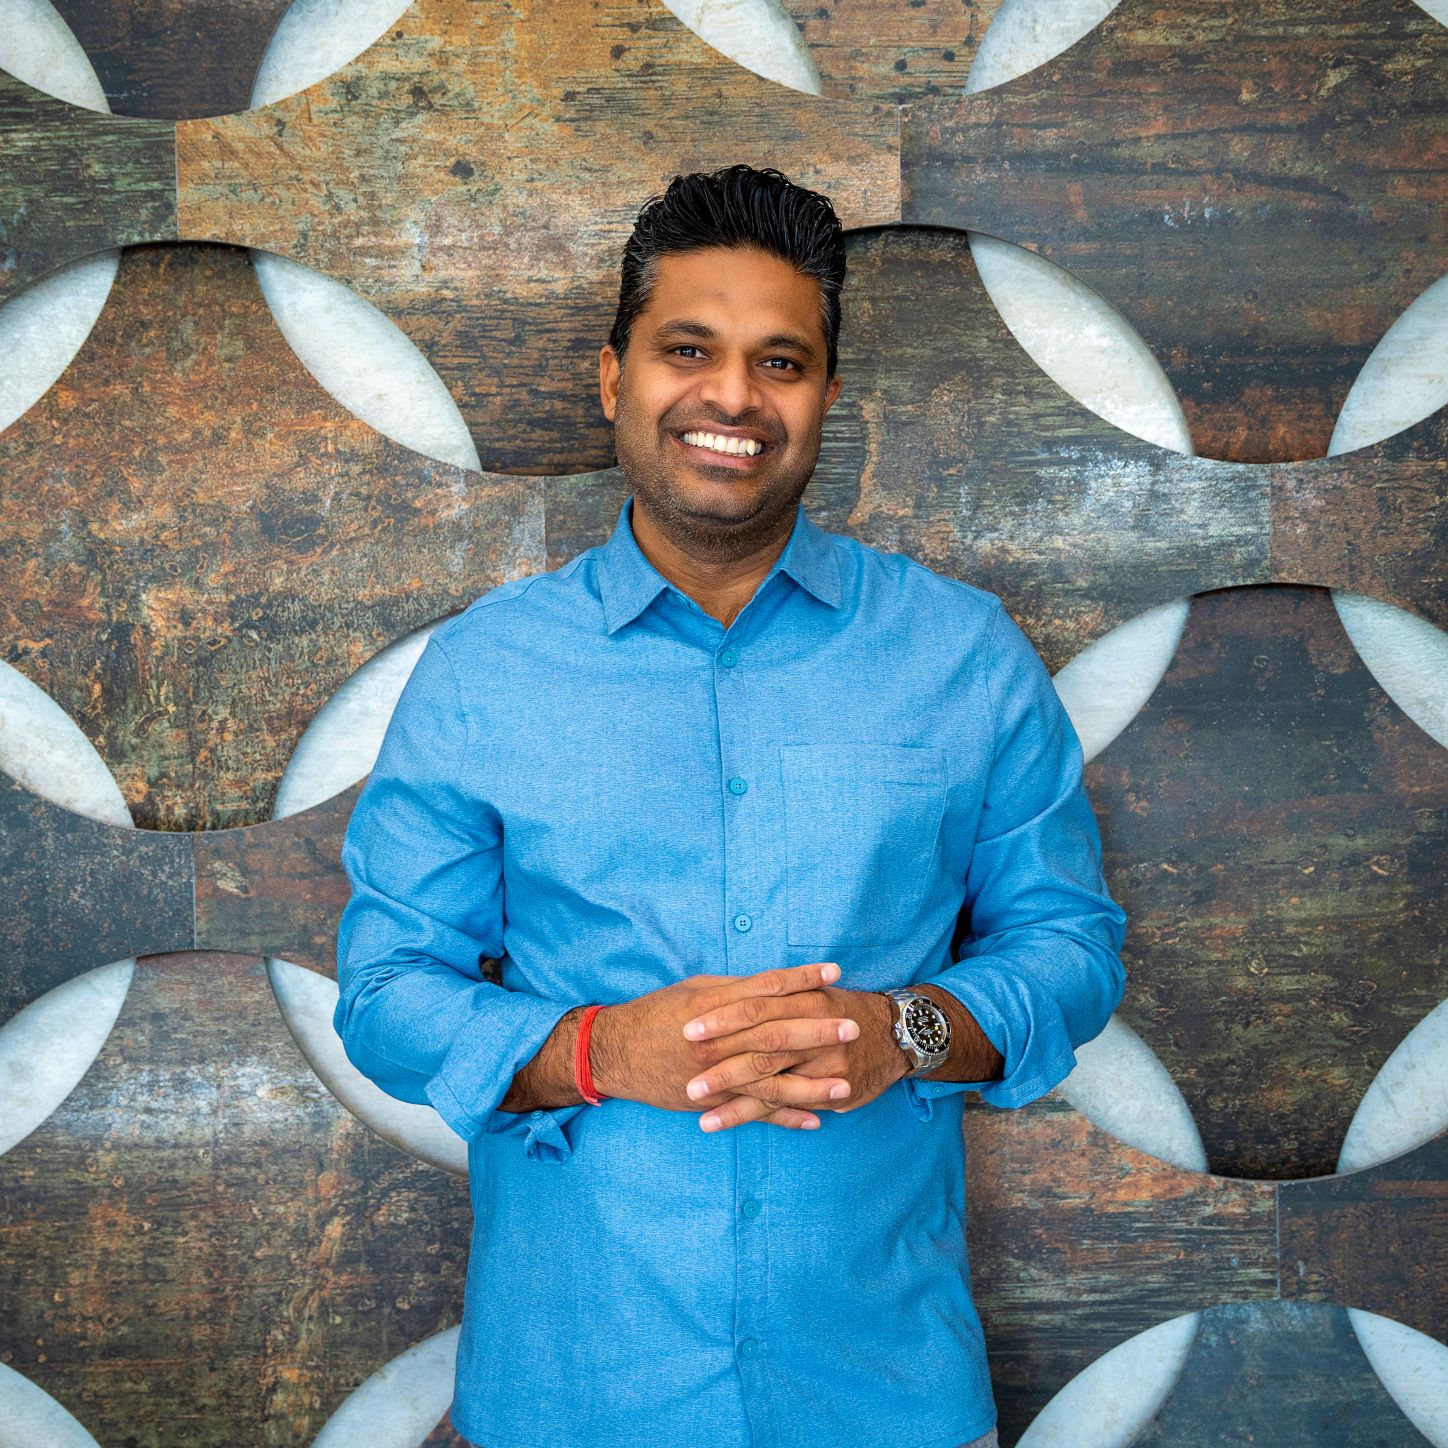 EO of DimeTyd and Chief Commercial Officer at Threecolts, Rohan Thambrahalli